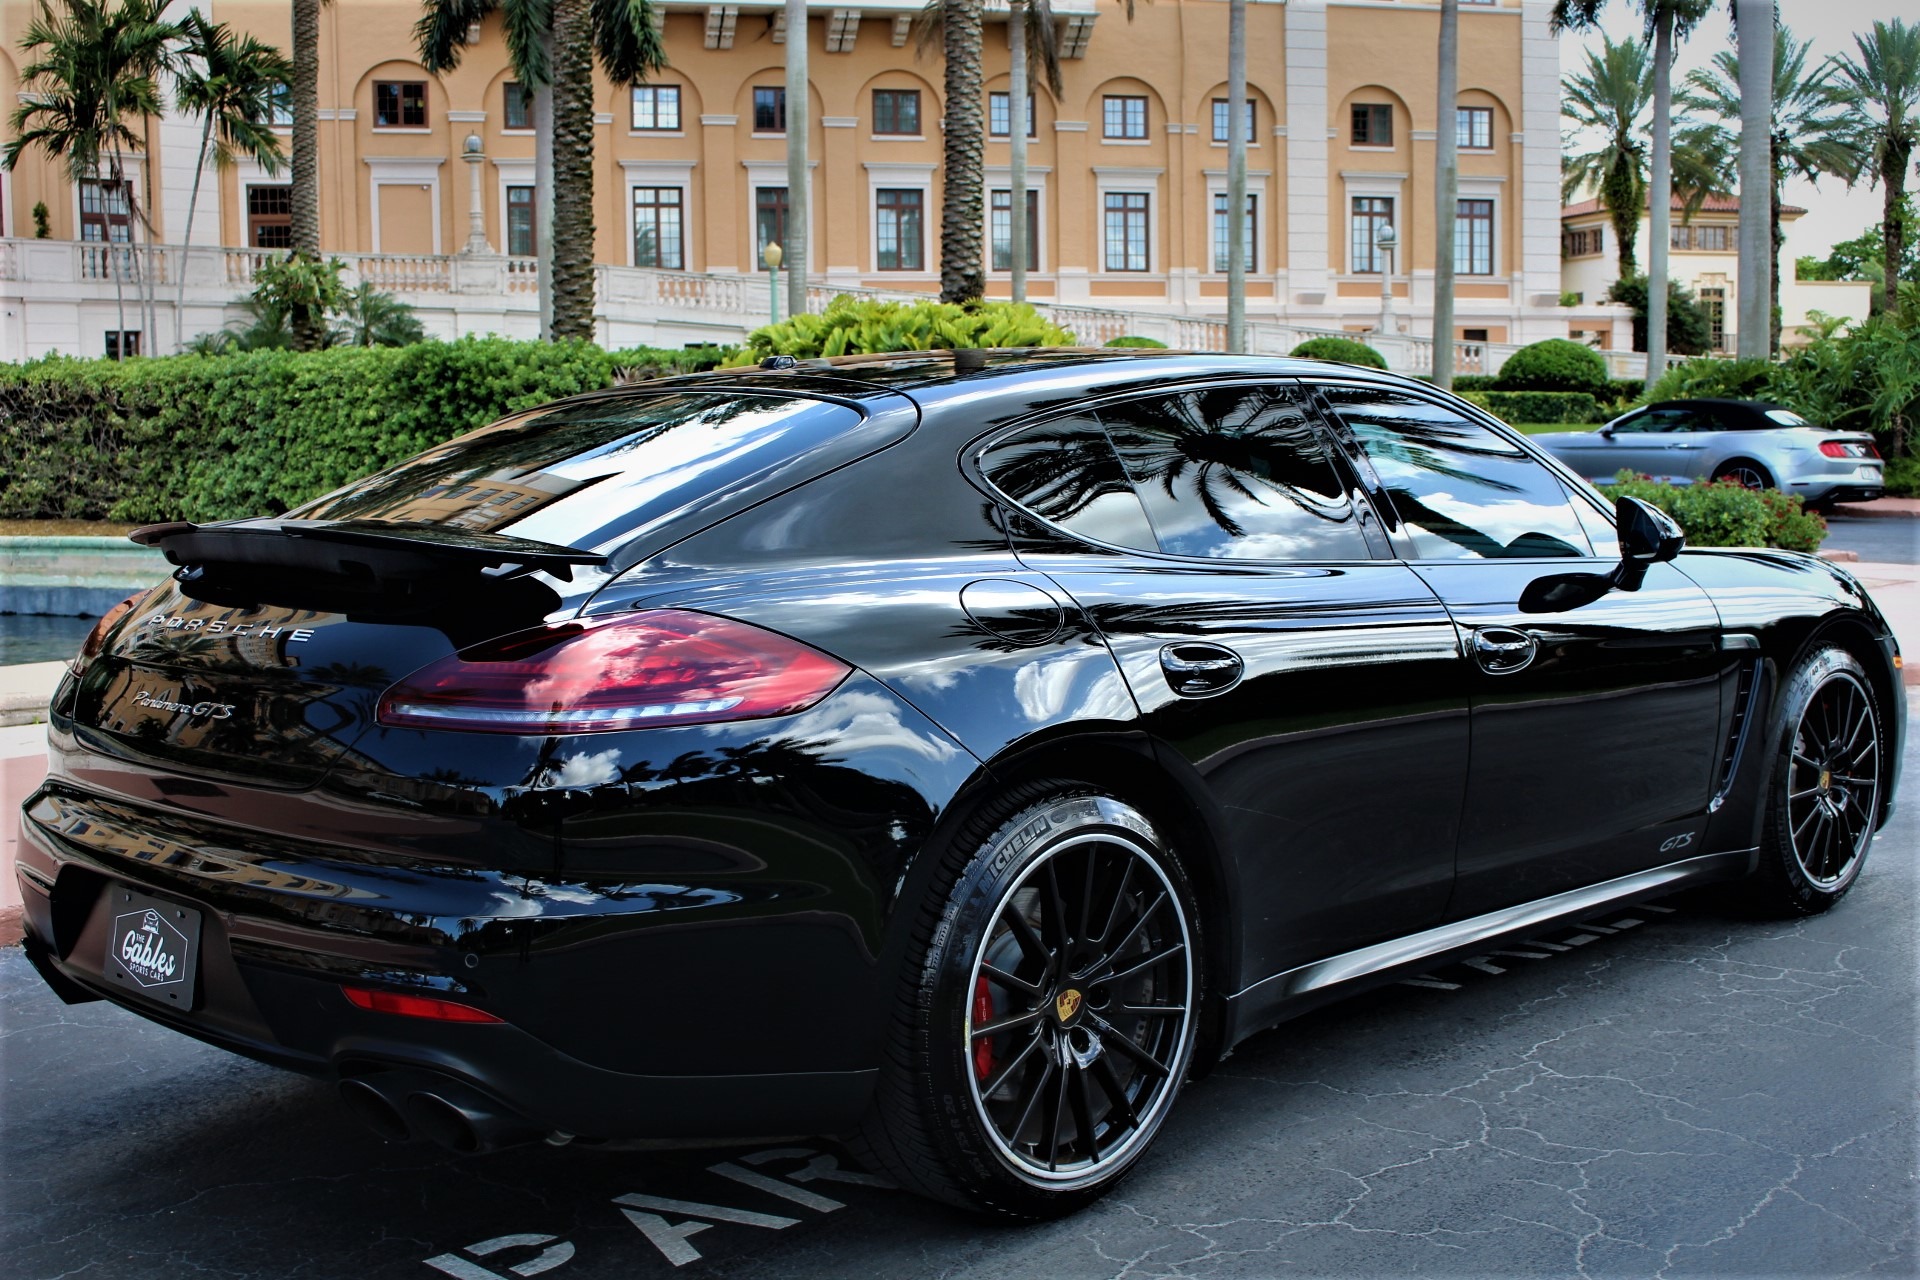 Used 2015 Porsche Panamera GTS for sale Sold at The Gables Sports Cars in Miami FL 33146 4